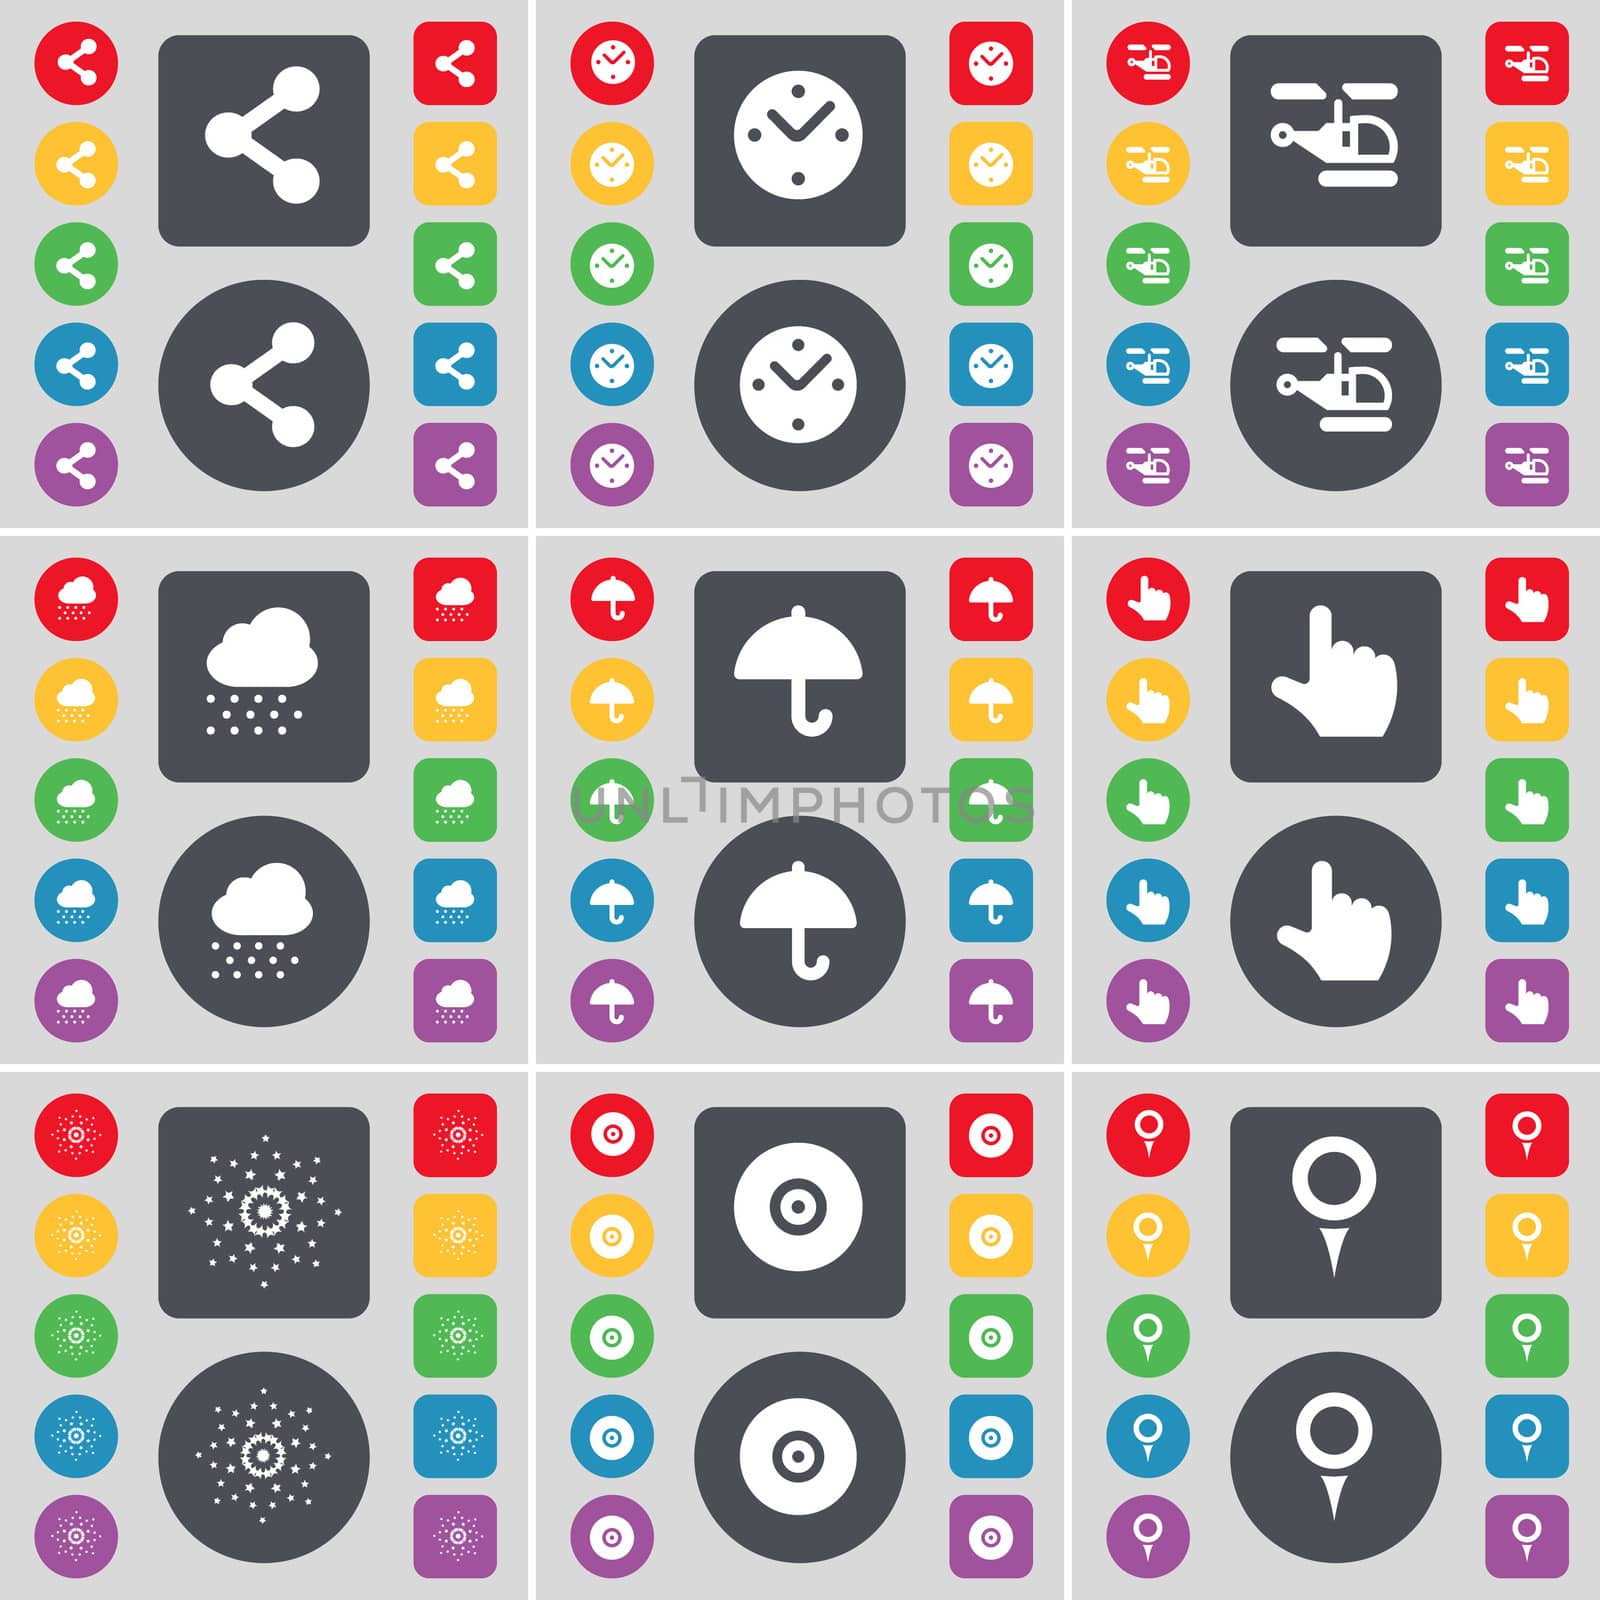 Share, Clock, Helicopter, Cloud, Umbrella, Hand, Star, Disk, Checkpoint icon symbol. A large set of flat, colored buttons for your design.  by serhii_lohvyniuk